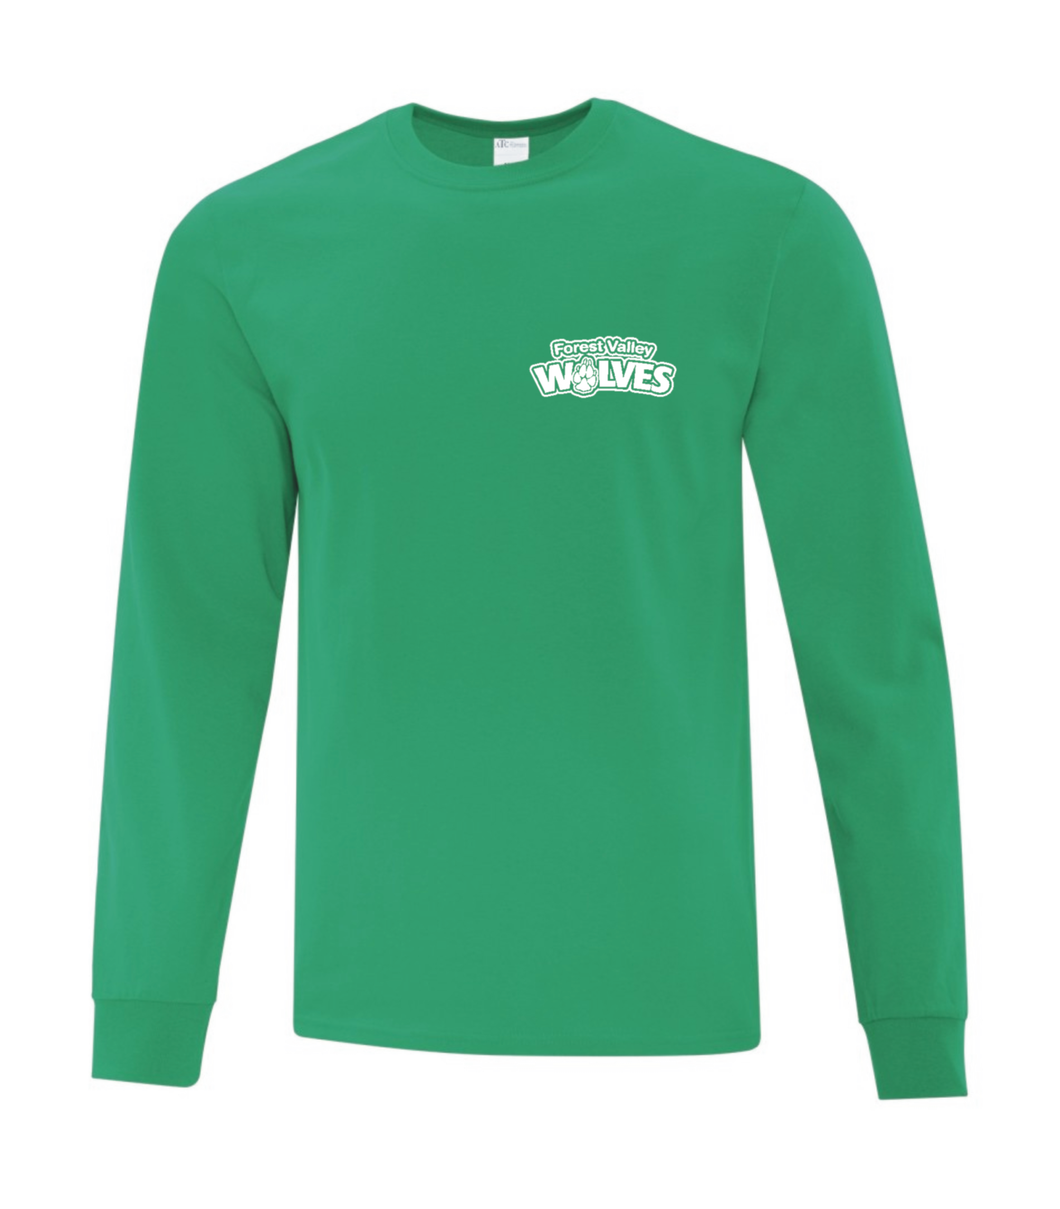 Adult Long Sleeve T-Shirt - Forest Valley Elementary School